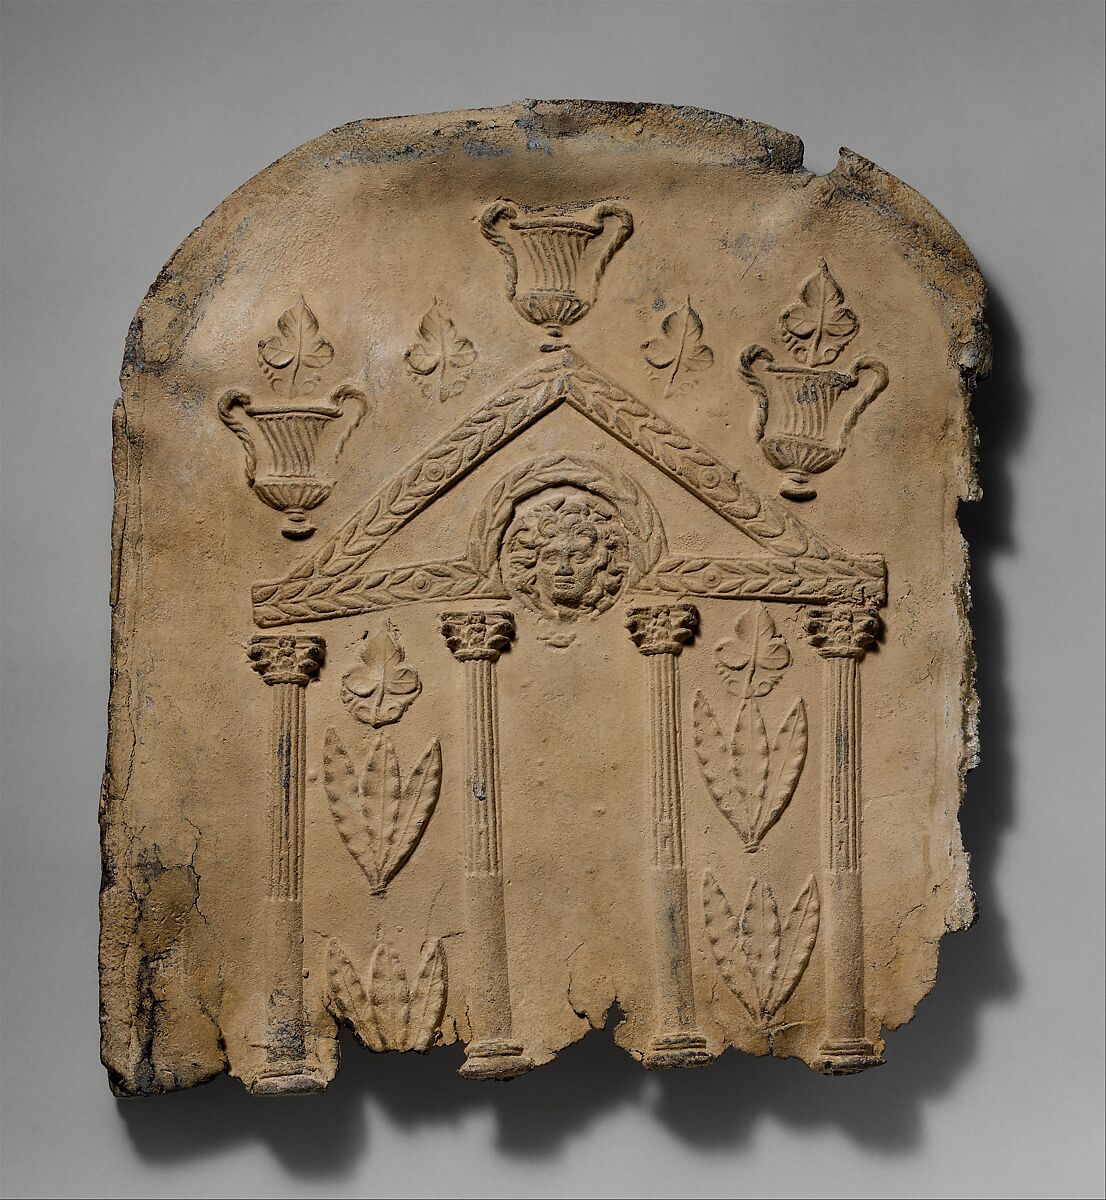 Lid and end panels of a lead sarcophagus